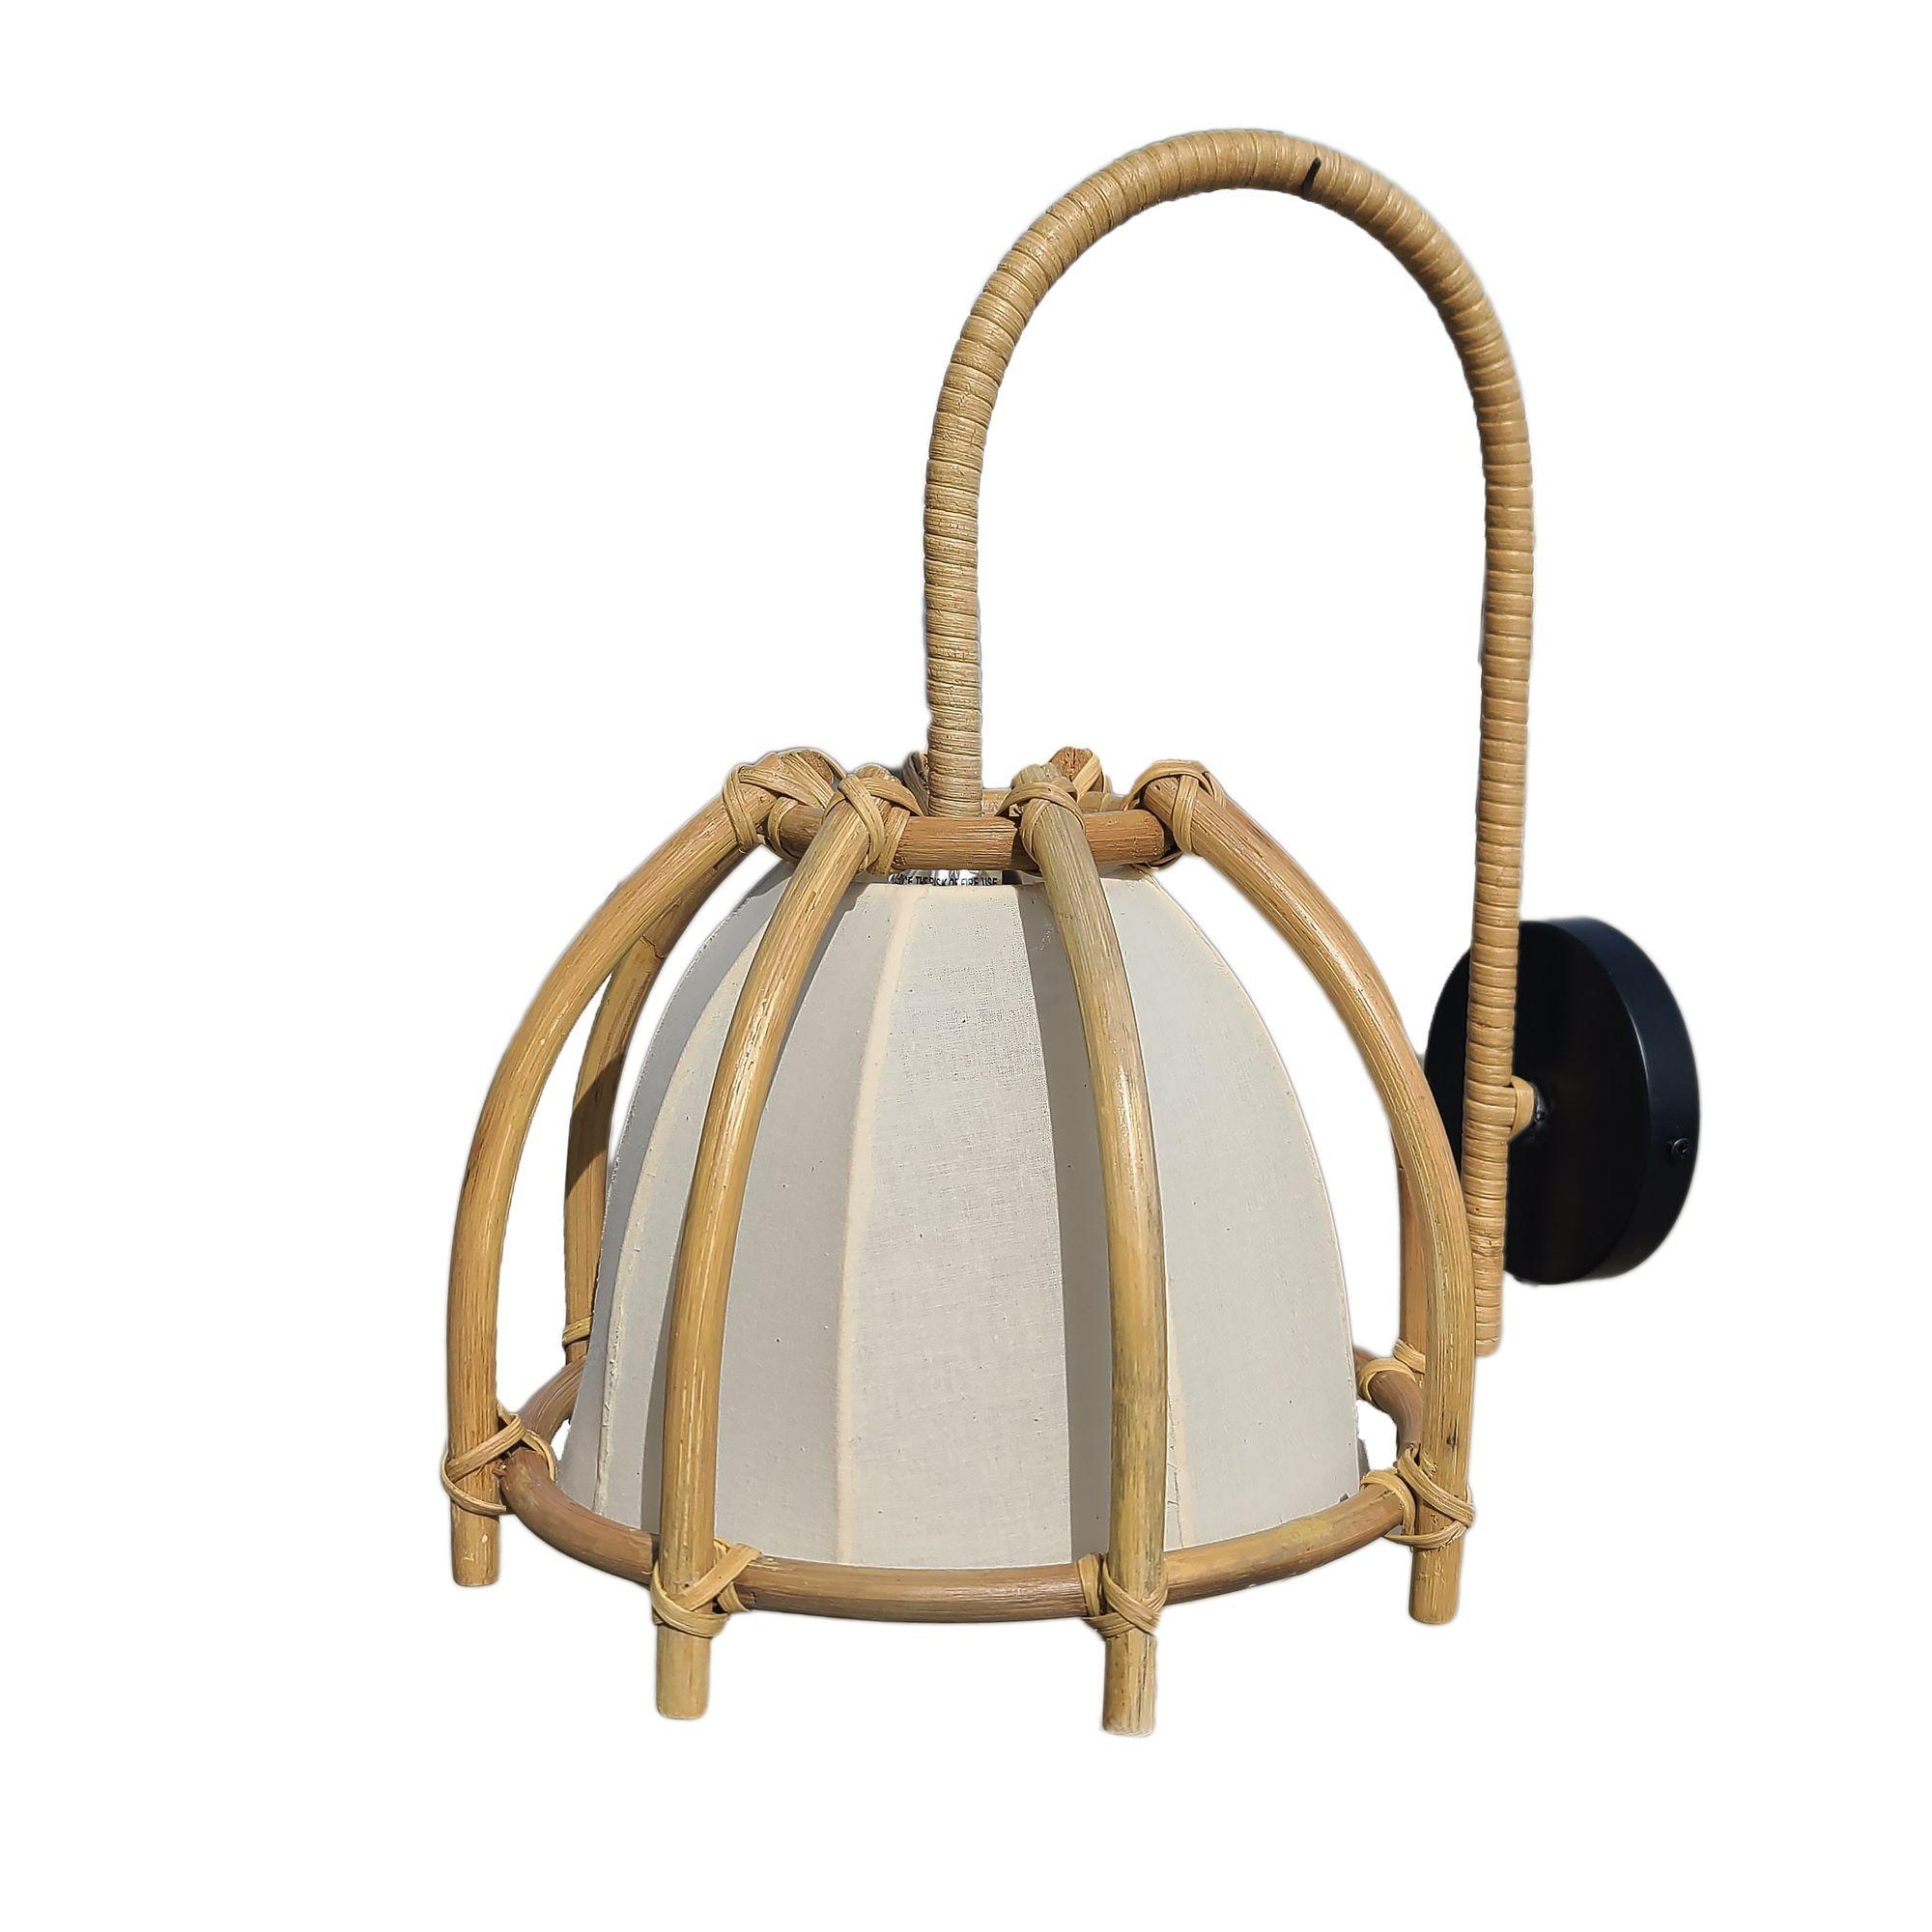 Original Natural finish 1990s rattan wall sconce perfect to add a little warmth to a modern house. The pendant features a stick rattan skeleton shade hung from a slit rattan-wrapped rod connected to a black wall plate.
Sold as a